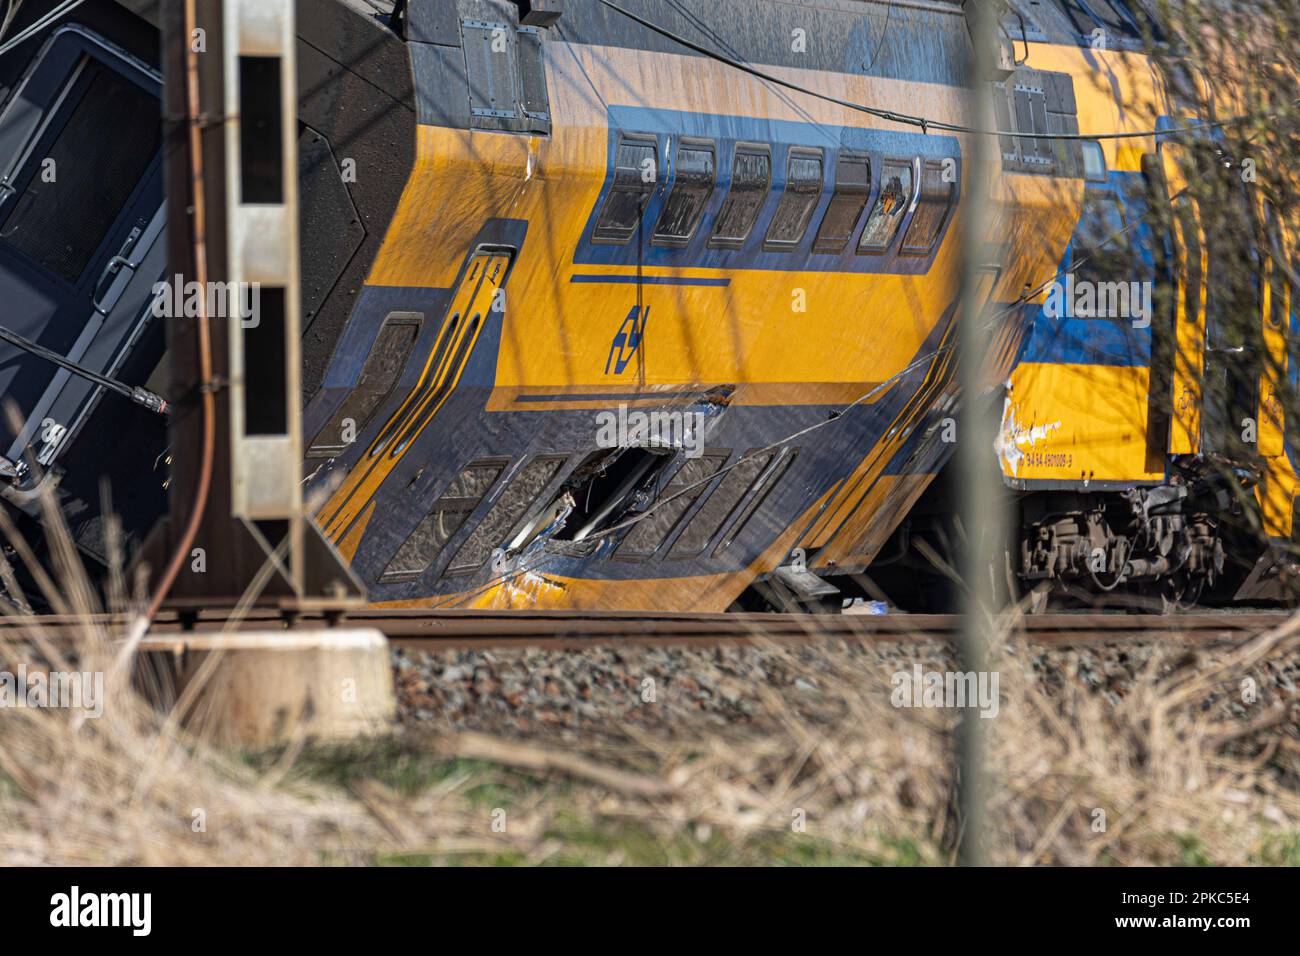 Voorschoten, Netherlands. 04th Apr, 2023. A view of a damaged carriage. A train collided with heavy construction equipment and derailment of the carriages near Leiden and the Hague. The Dutch railway crash resulted deadly, killing one person and injuring 30. Emergency services workers and police were on the scene to assess the damage. The accident took place in Voorschoten in the Netherlands. (Photo by Nik Oiko/SOPA Images/Sipa USA) Credit: Sipa USA/Alamy Live News Stock Photo